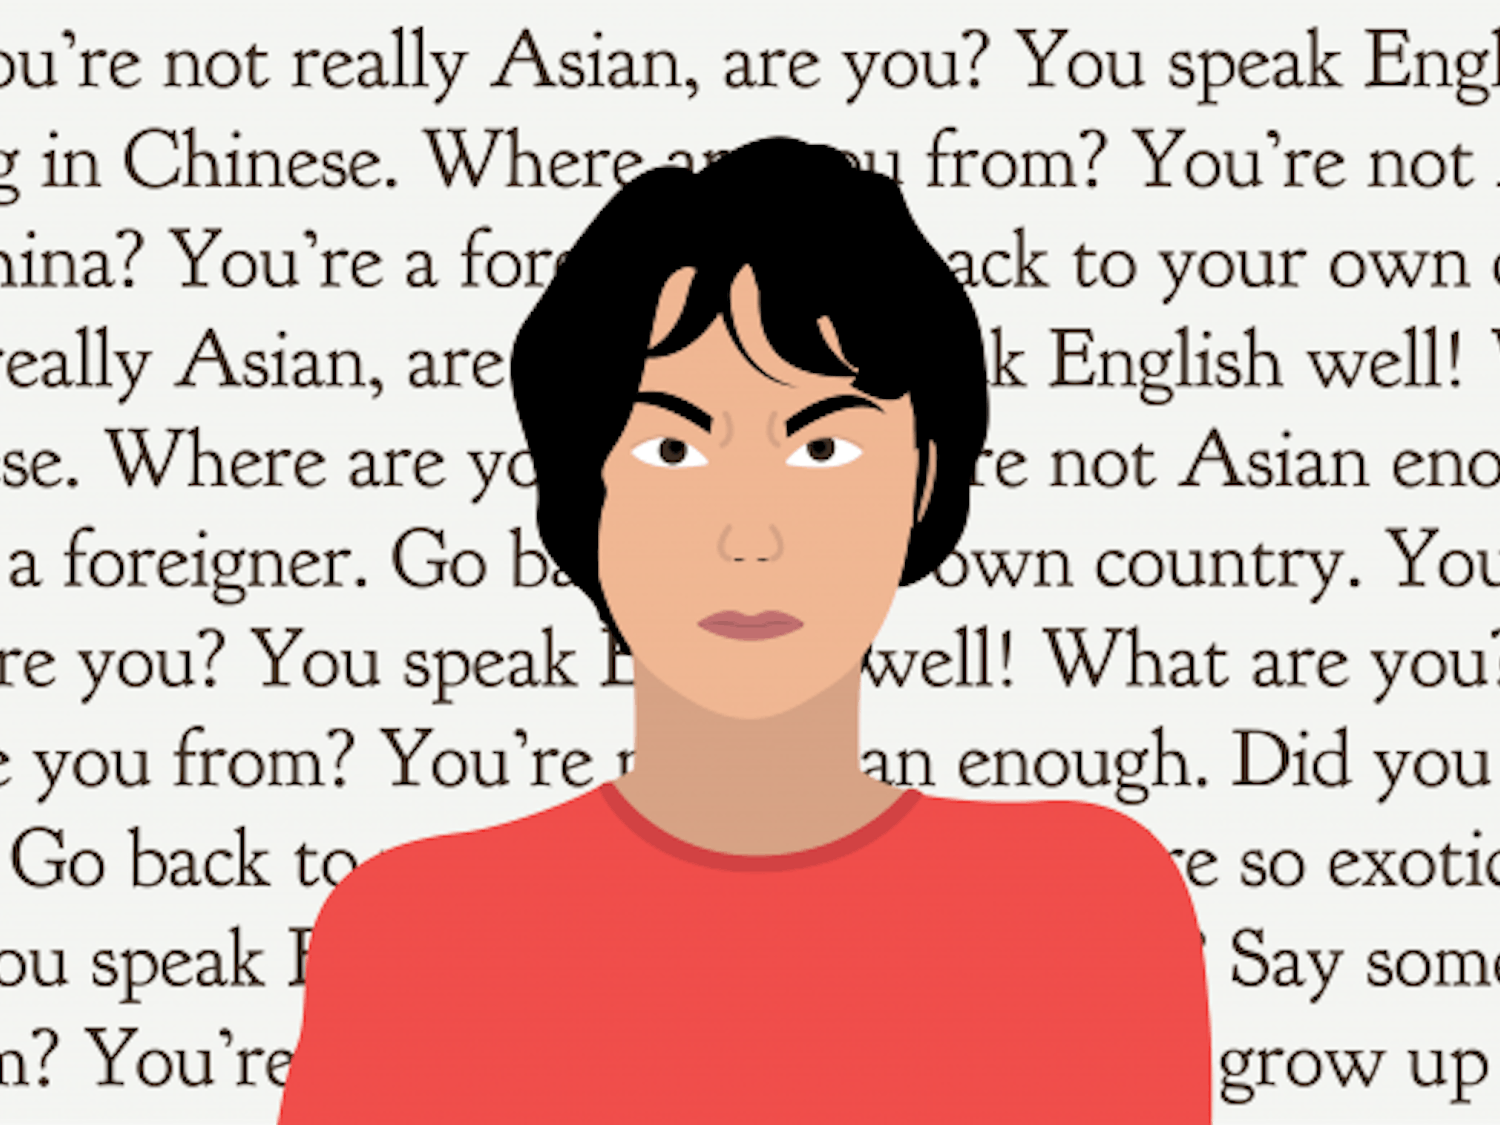 microagressions-against-asians.png